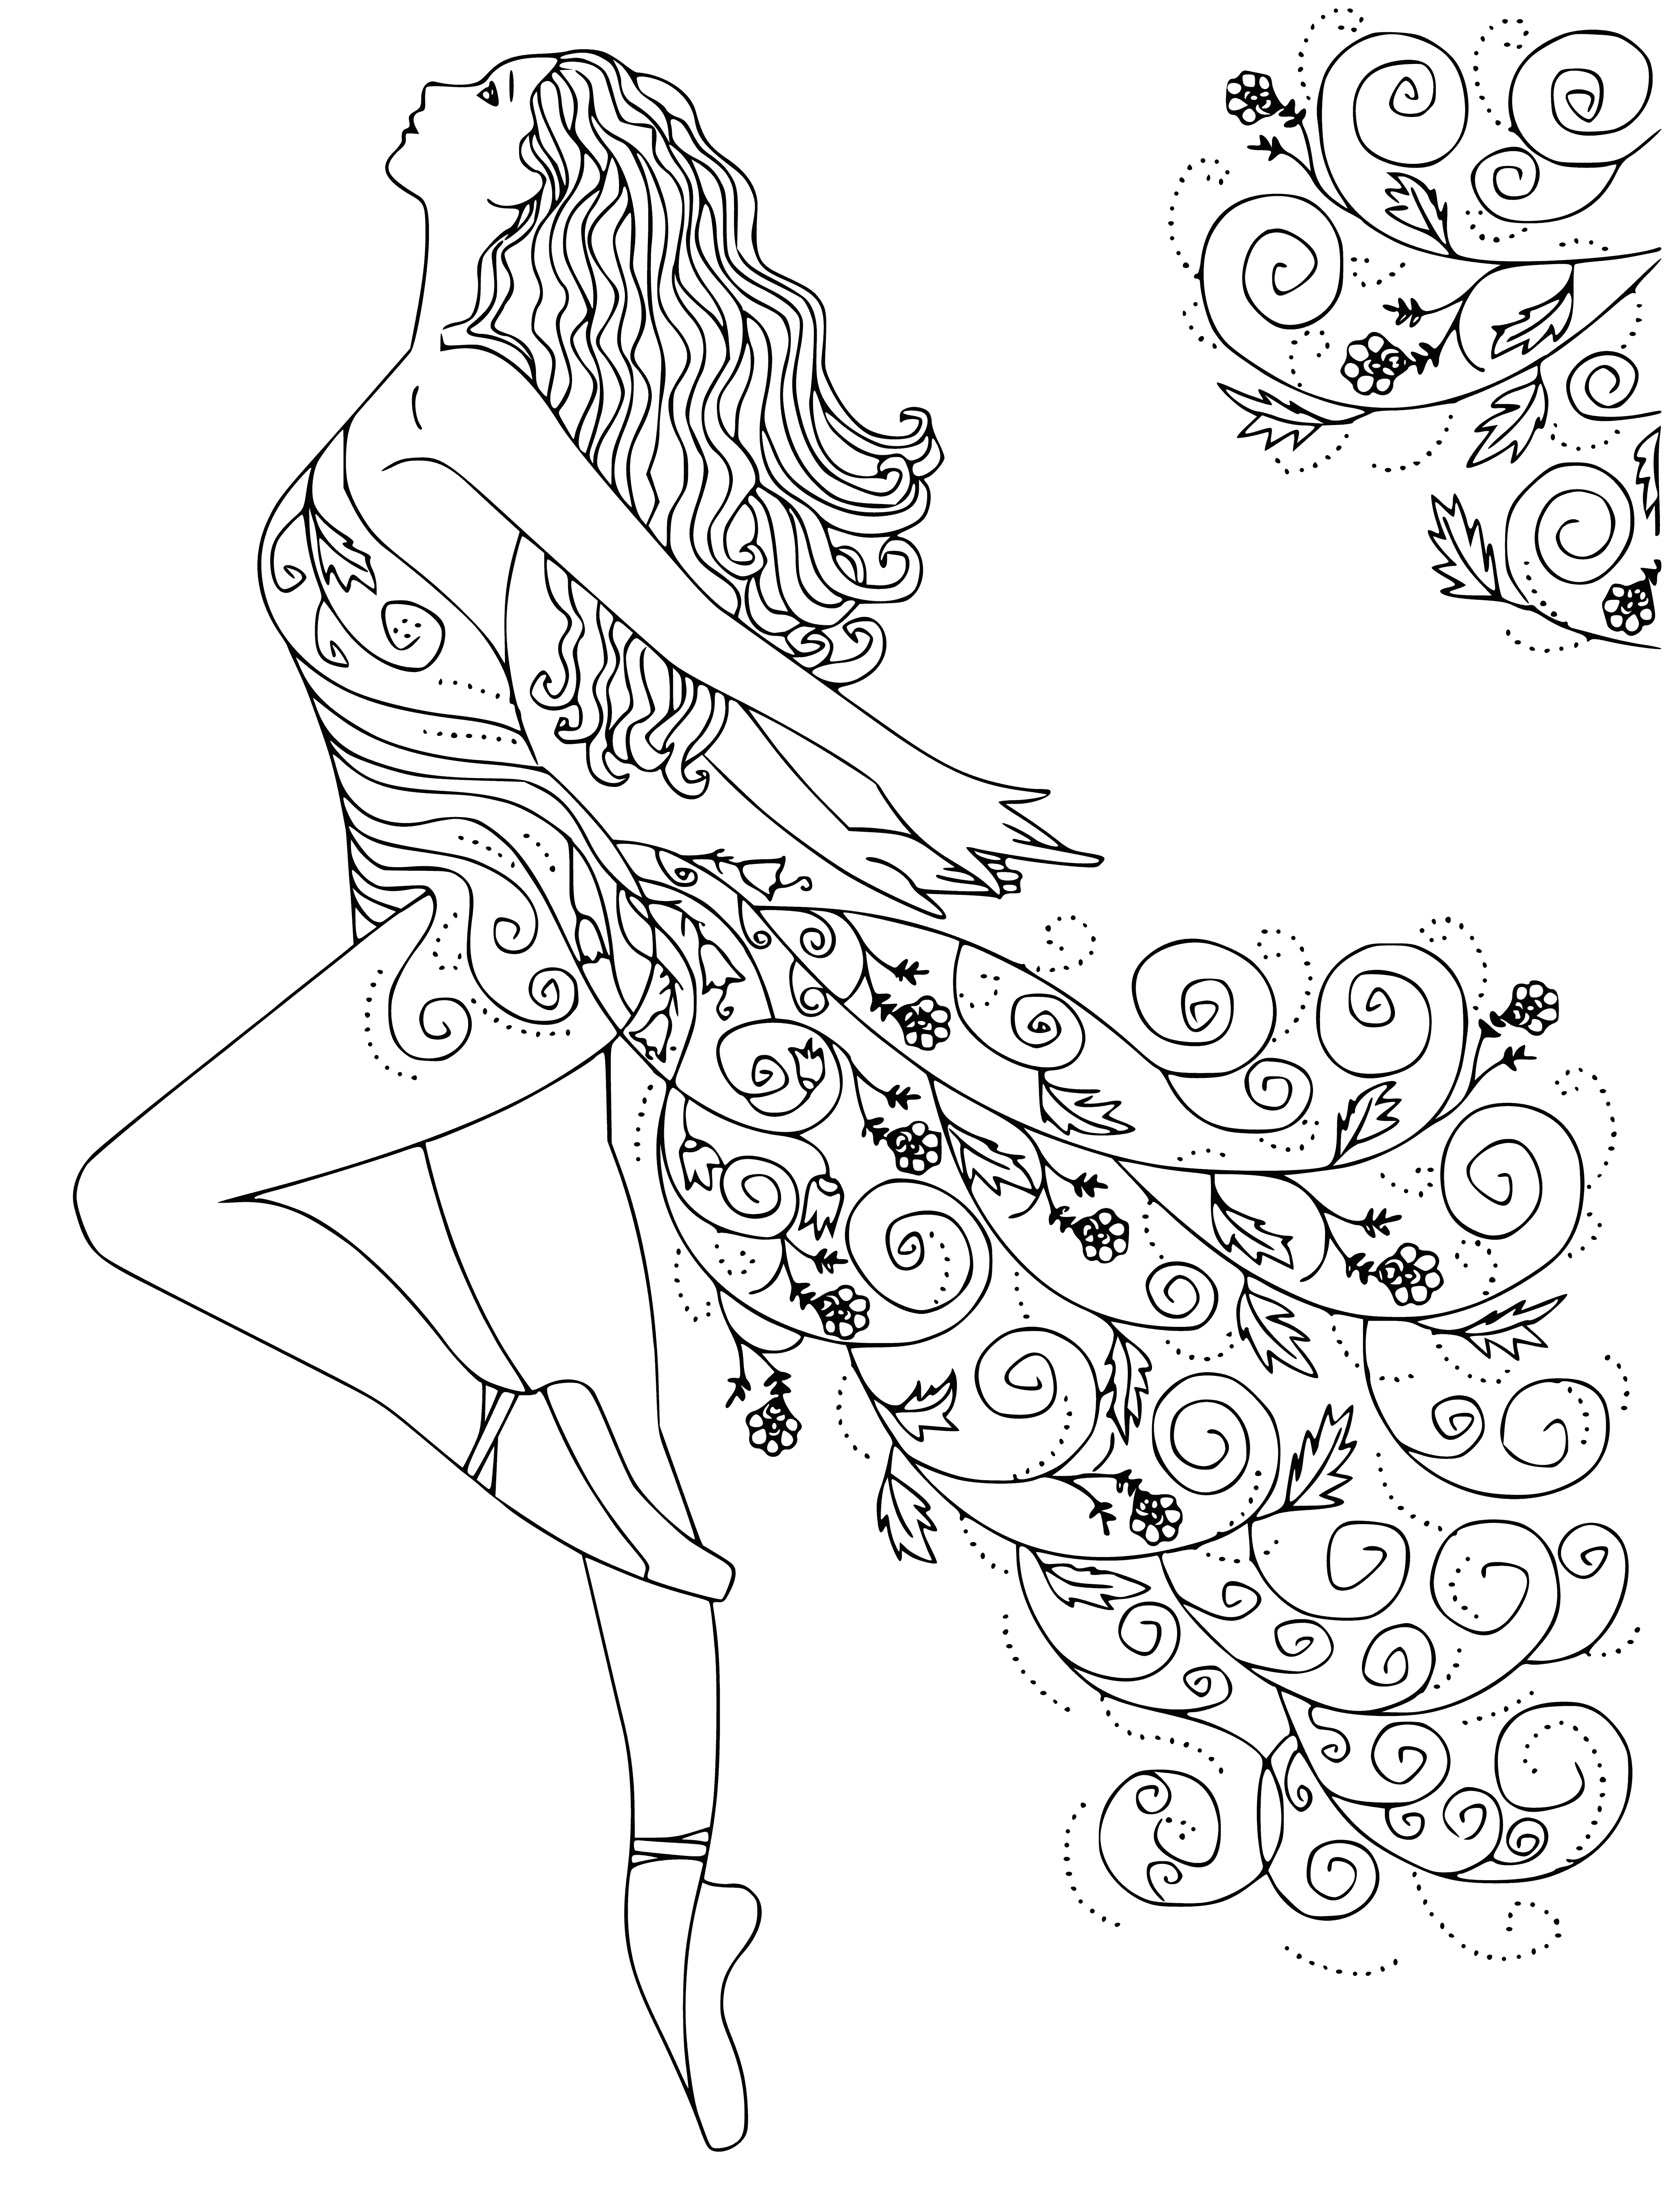 coloring page: A ballerina is a professional dancer who performs classical ballet, wearing a tutu & pointe shoes to help stand on her toes.